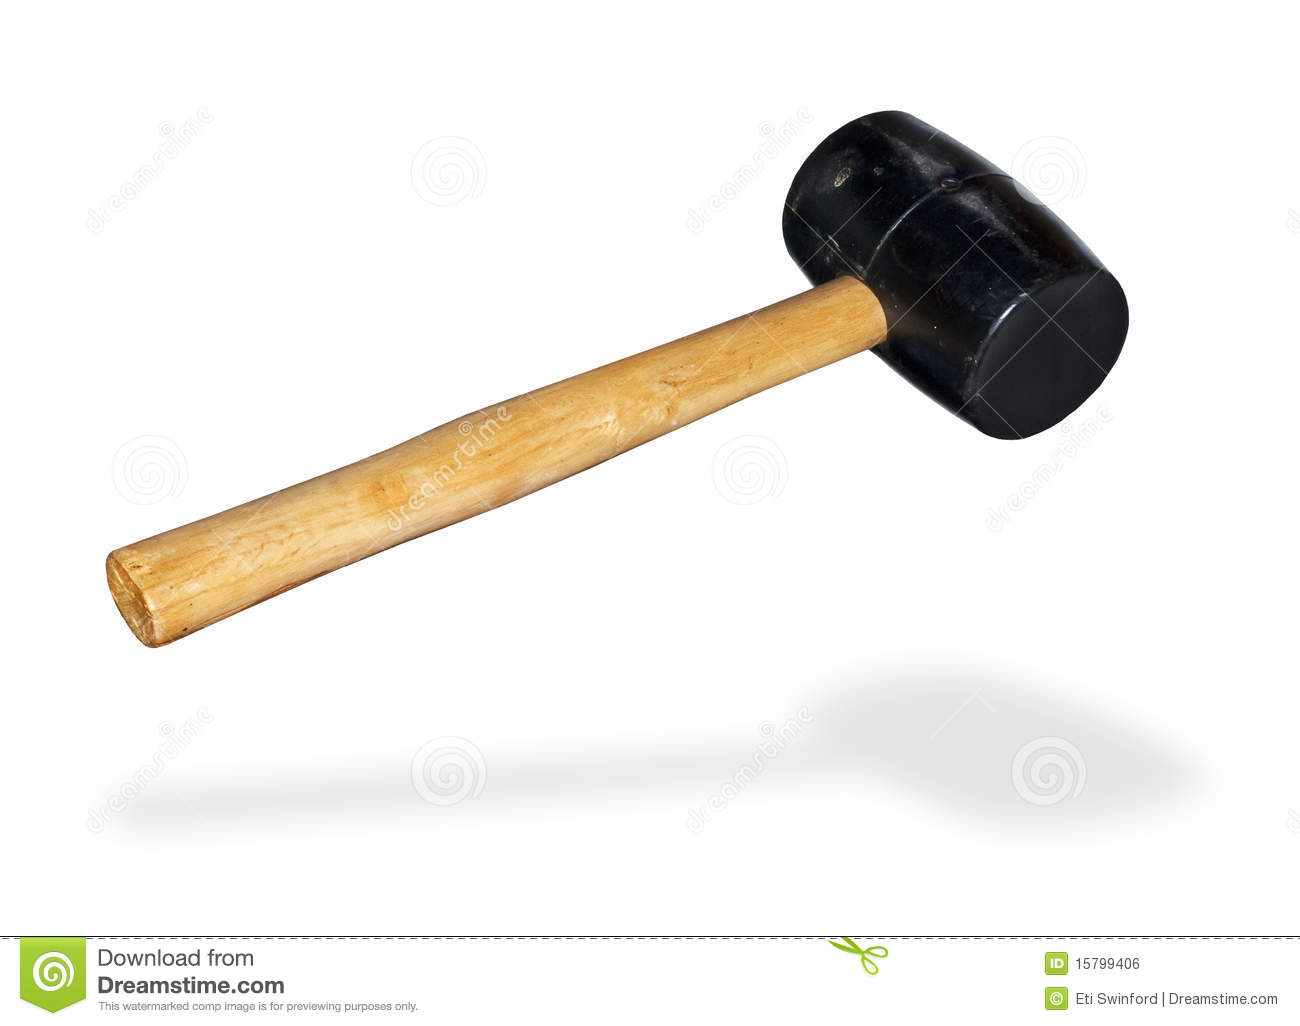 Rubber Mallet Royalty Free Stock Image   Image  15799406